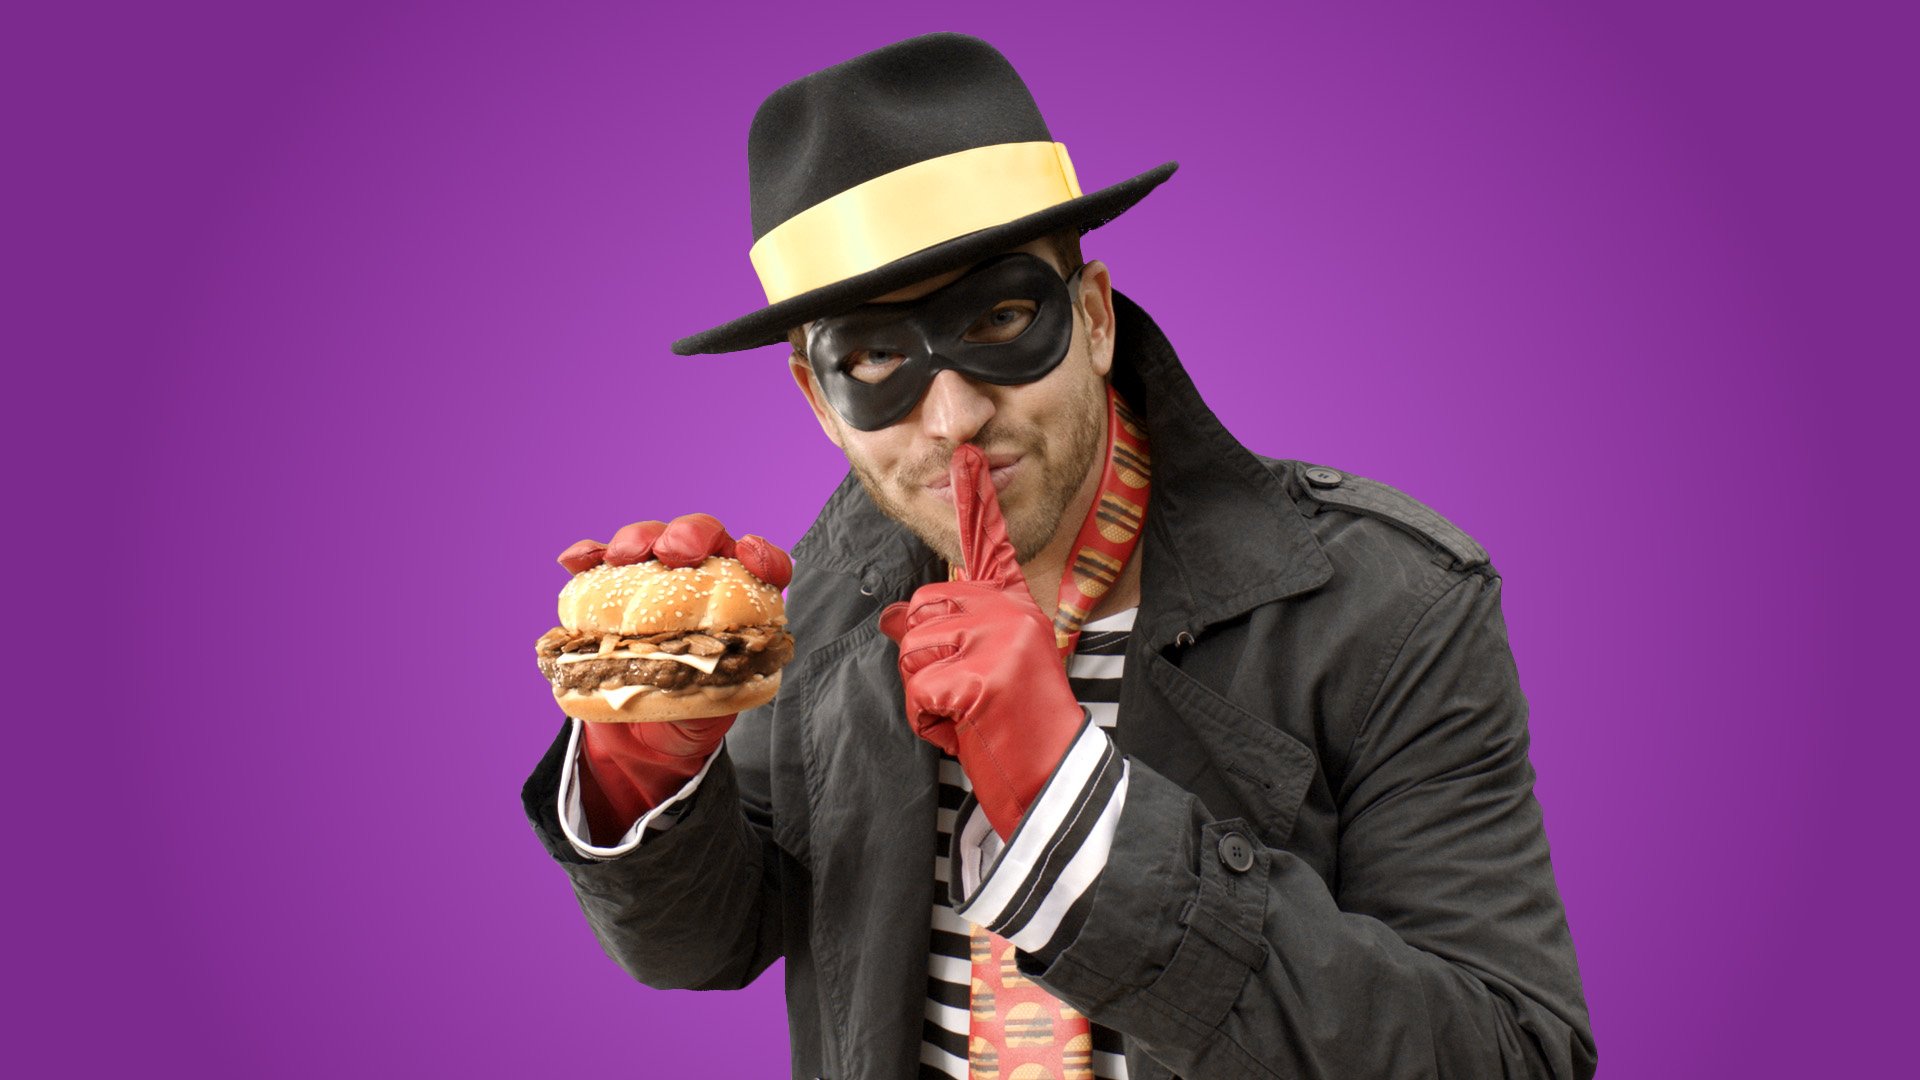 Only a Super Smart Person Can Guess 17/20 of These Words from Their Meaning. Can You? hamburglar